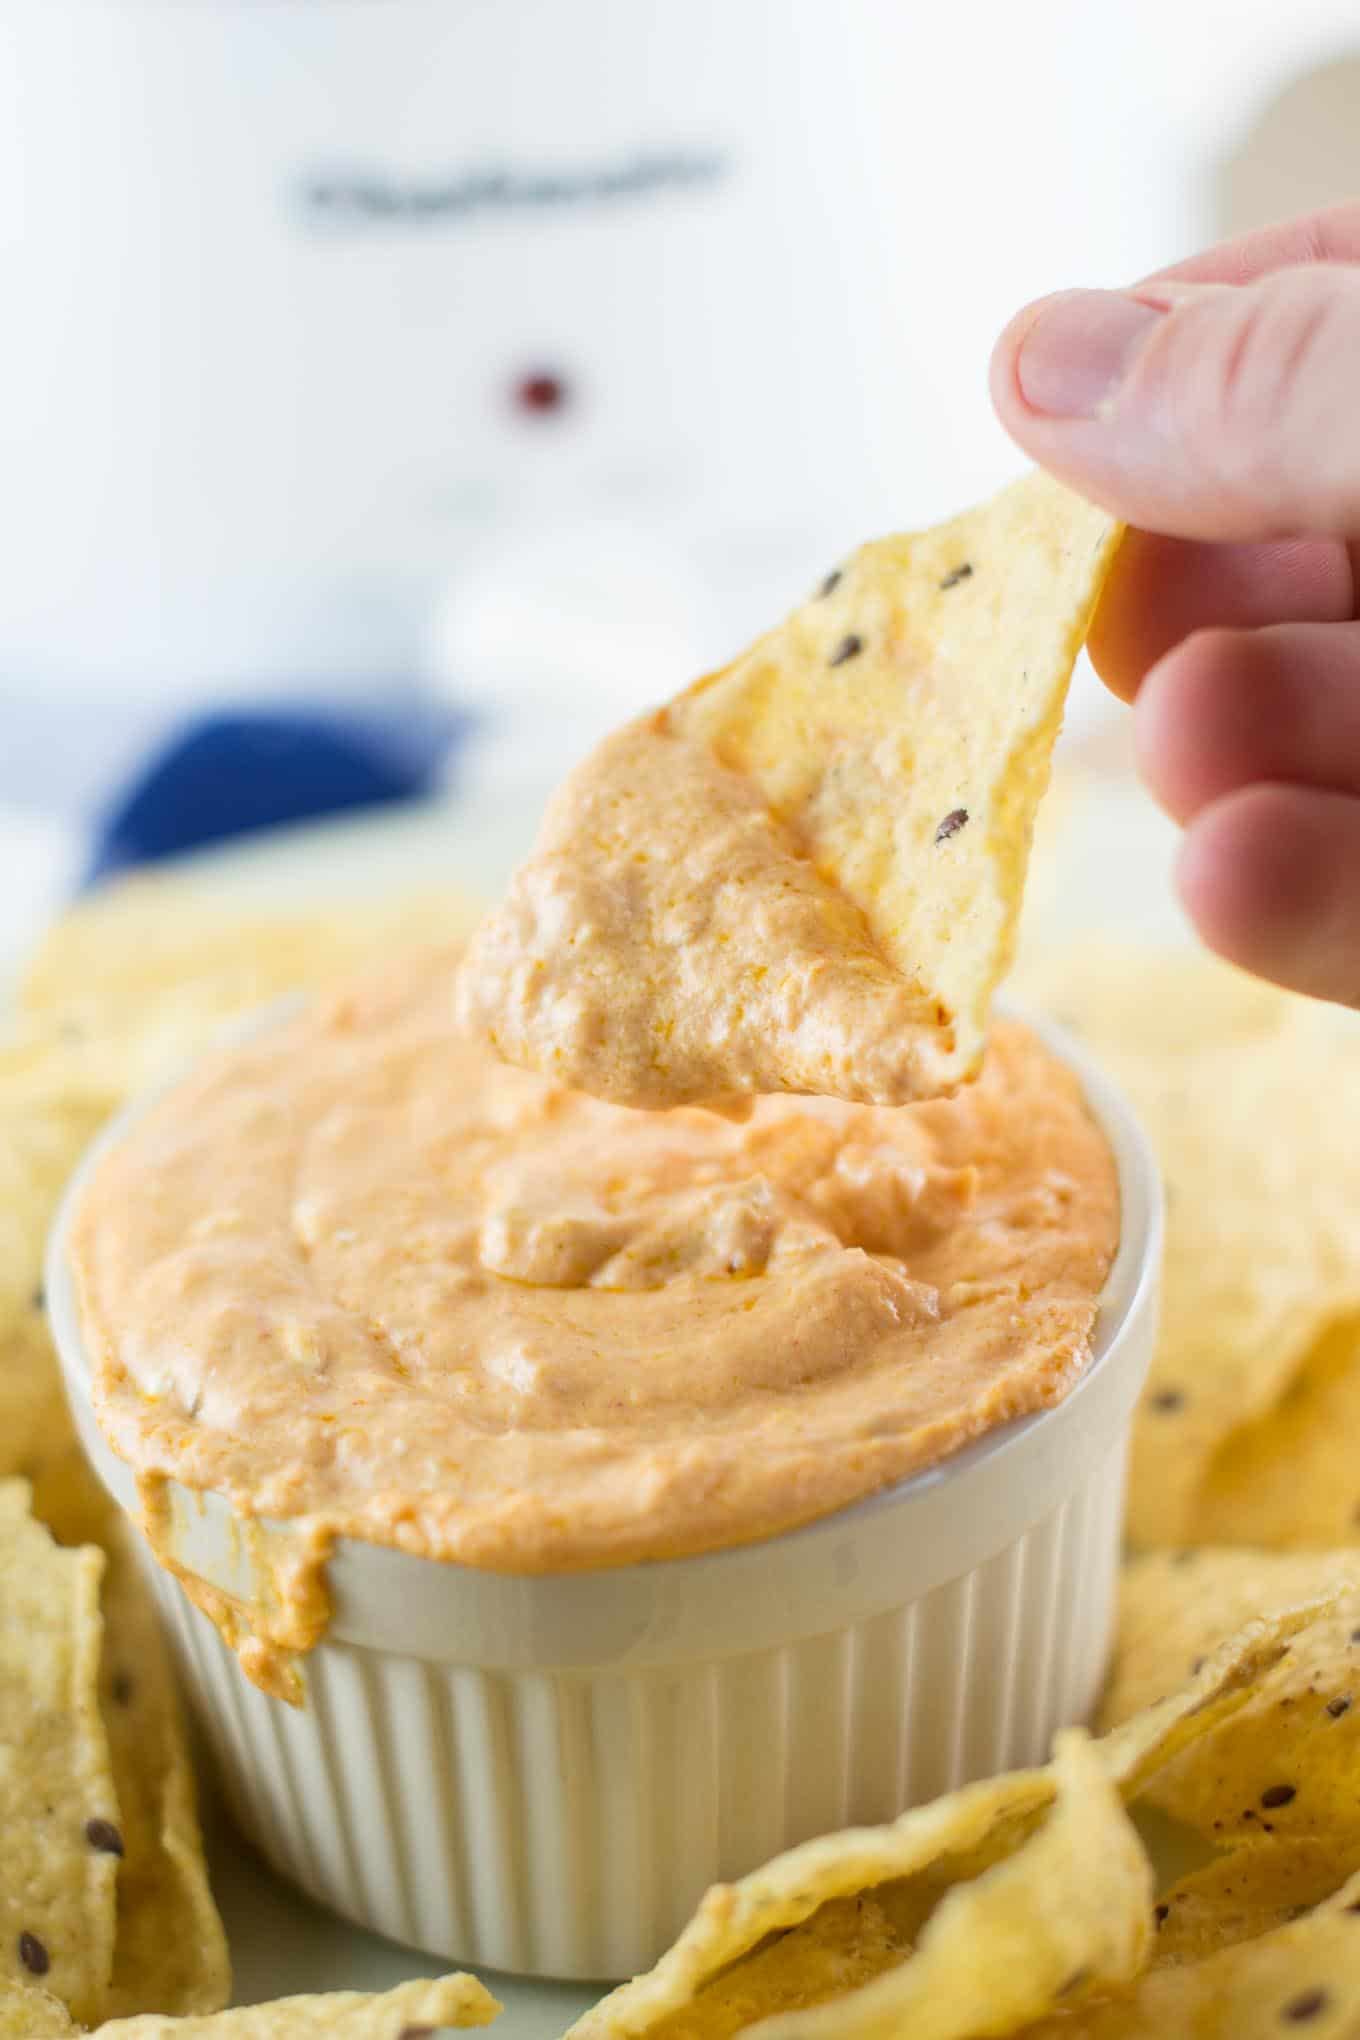 slow cooker queso dip